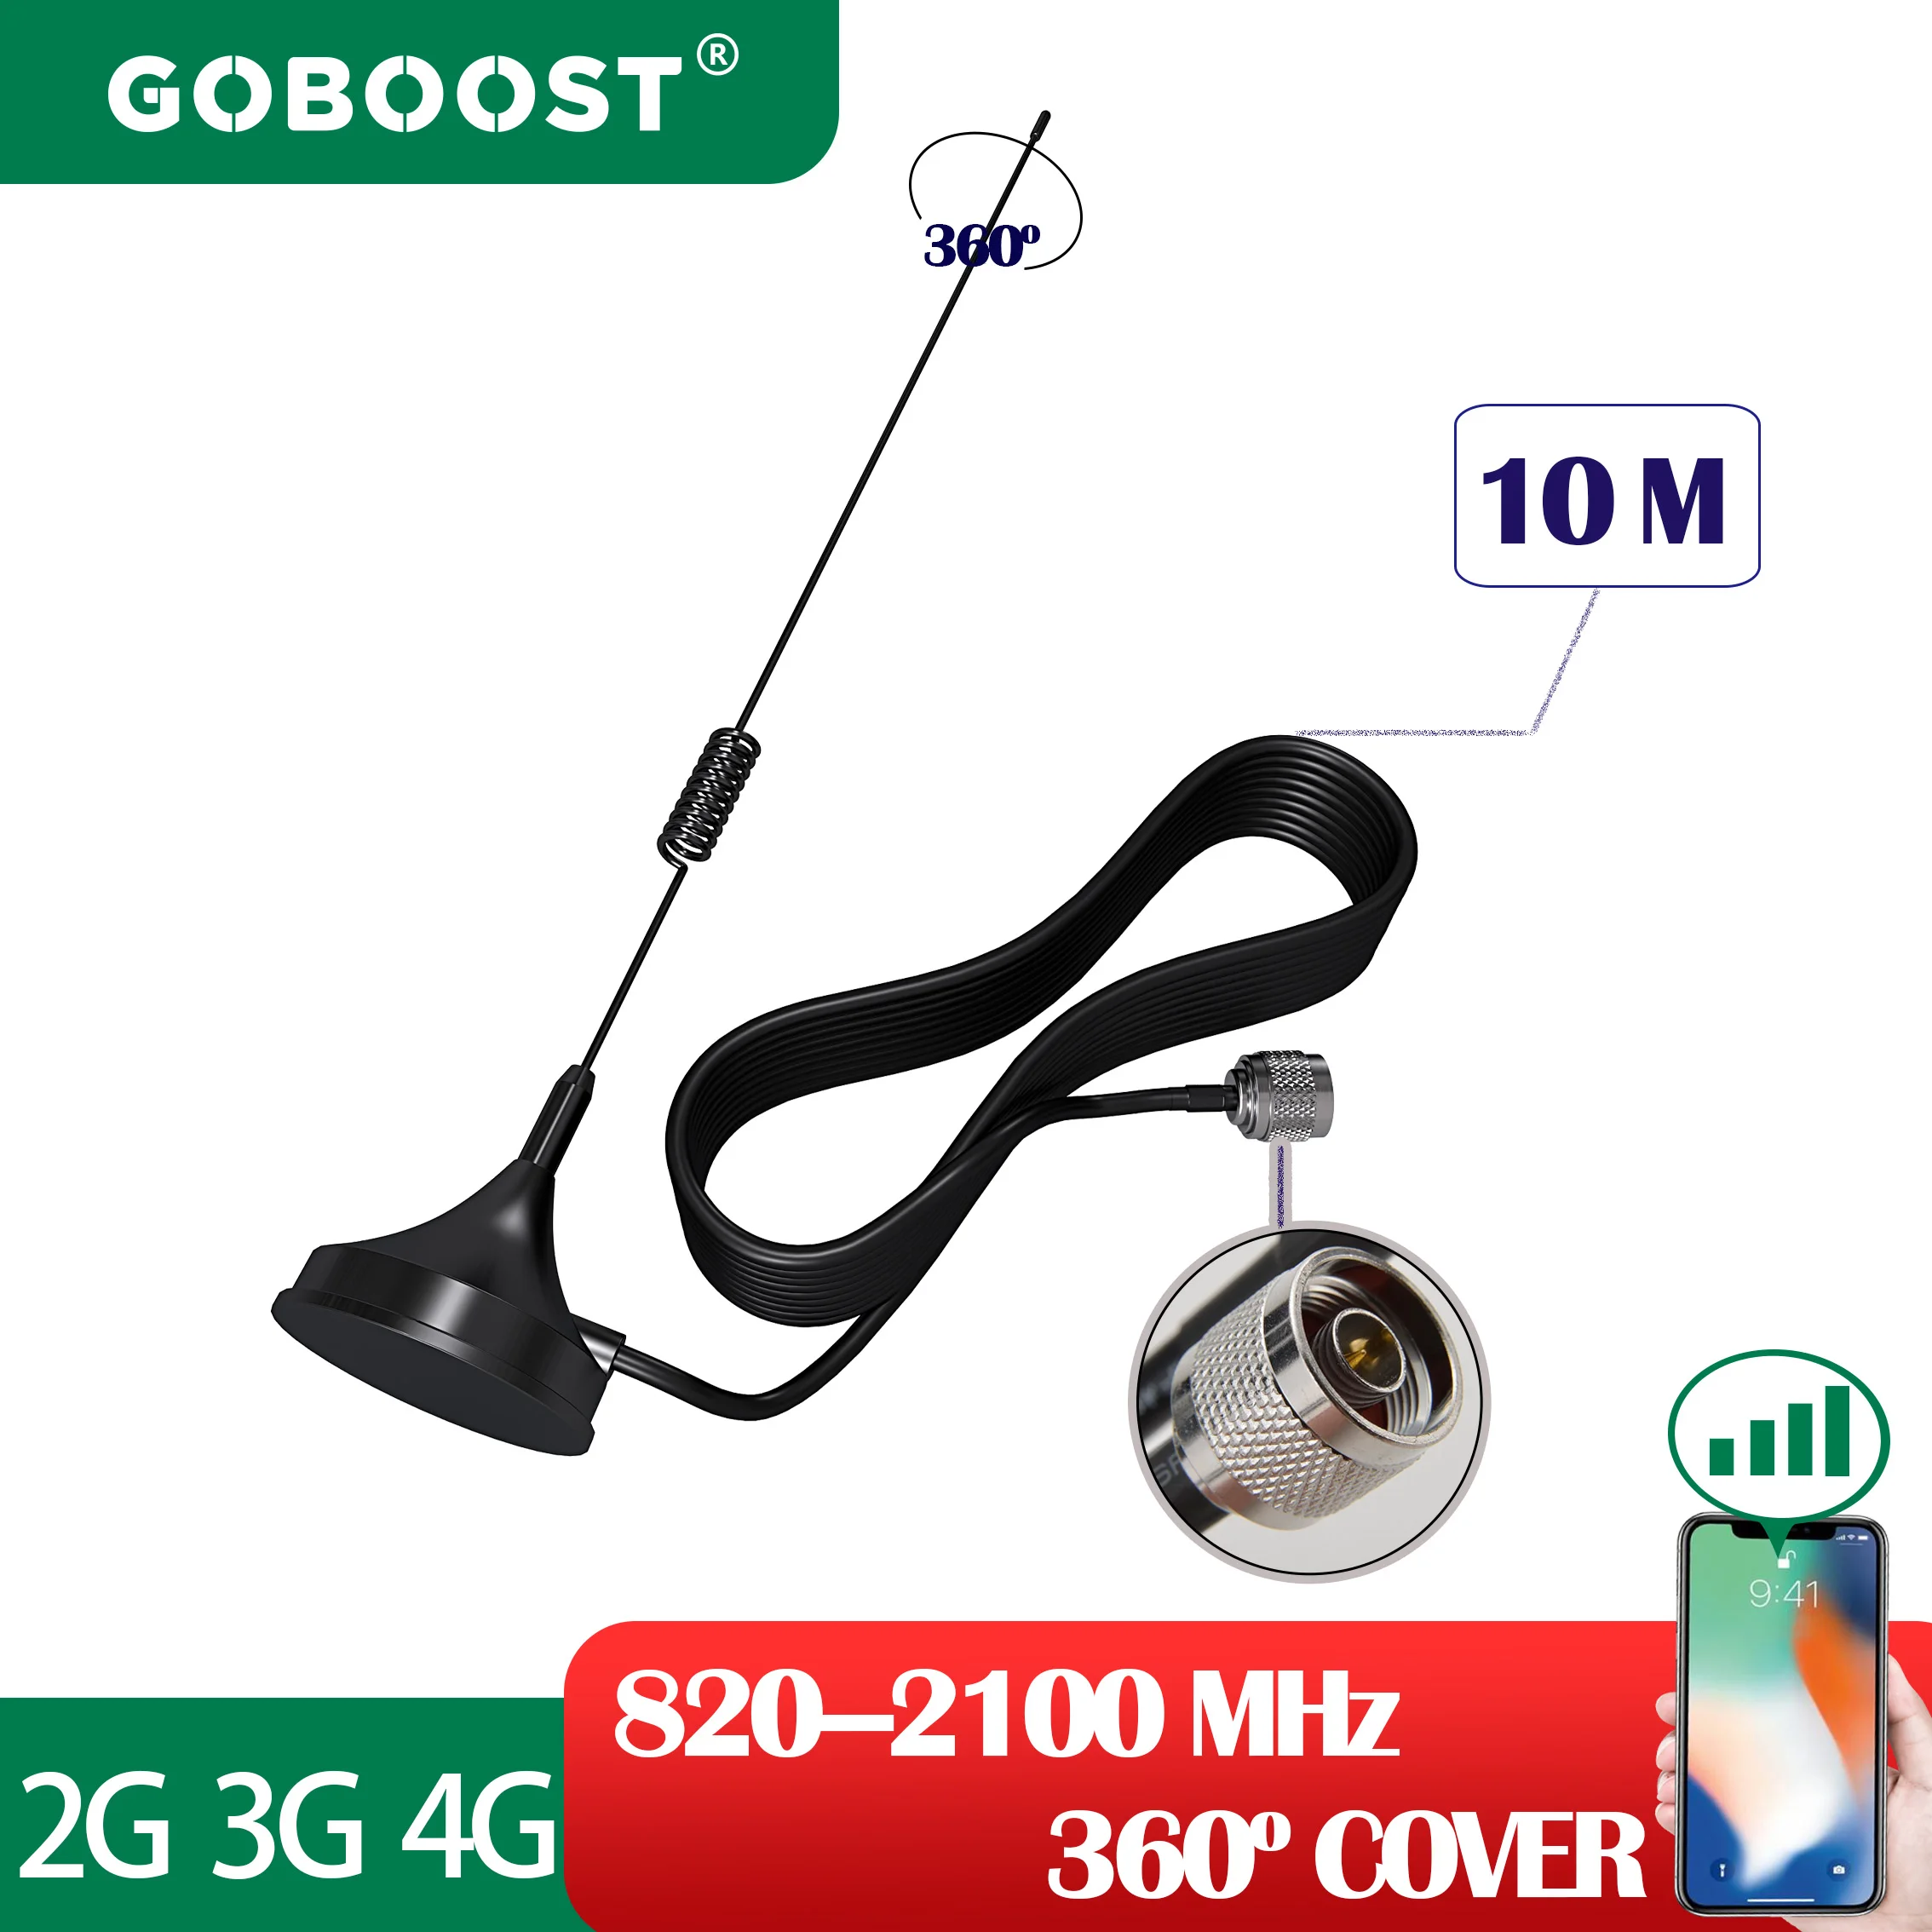 

GOBOOST 3G 4G Network Cellular Amplifier Indoor Antenna 820mhz-2100mhz For Signal Booster Internet LTE DCS WCDMA 900 1800 2100